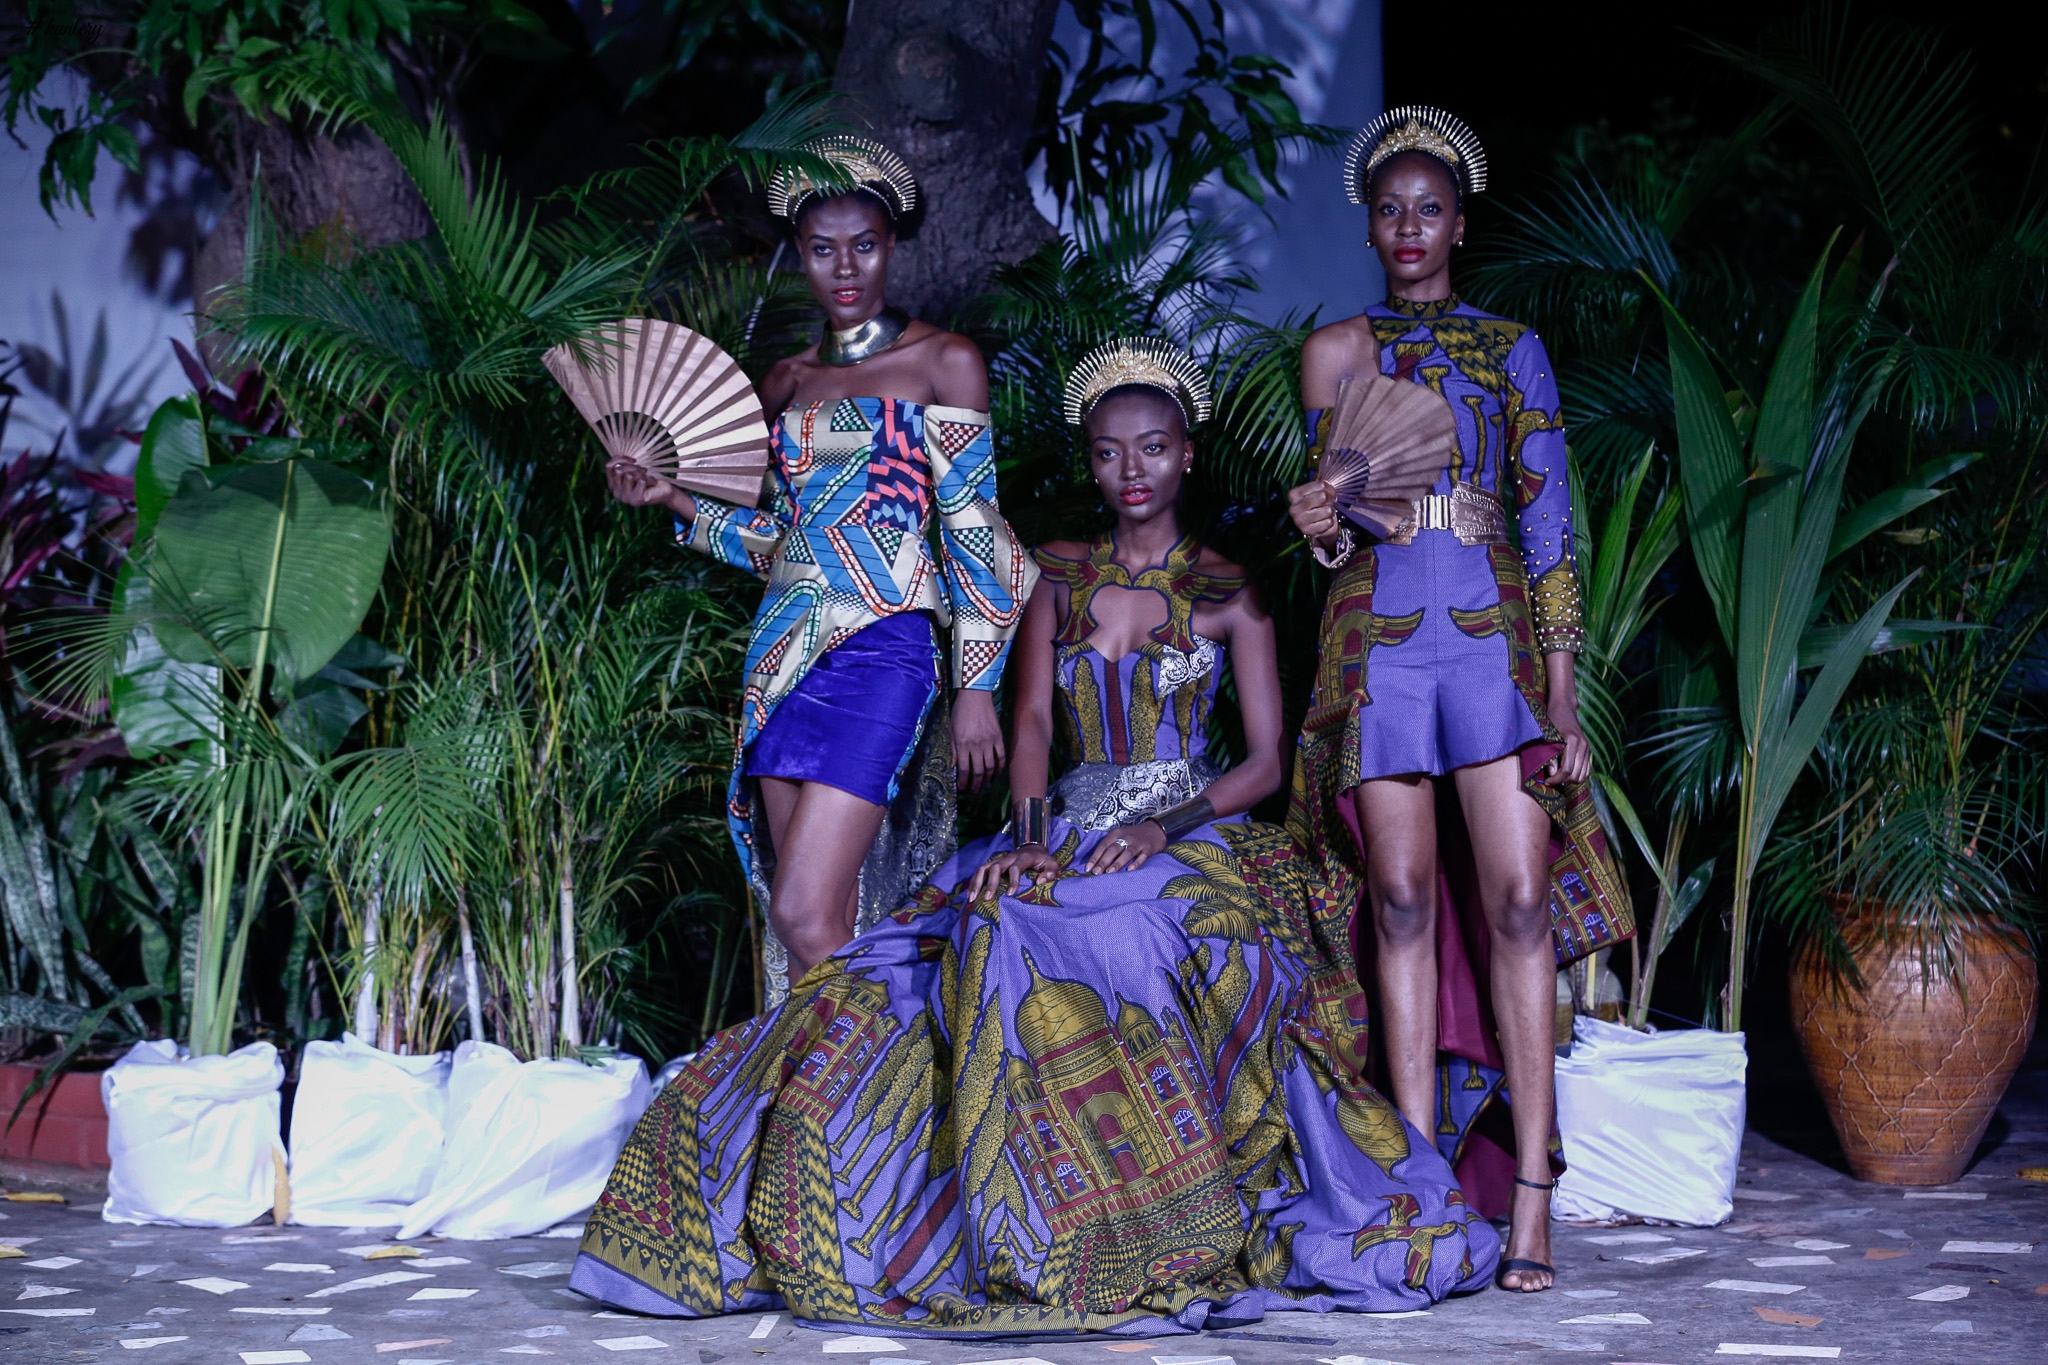 Classic & Modern Prints! Vlisco Kicks Off A New Project Titled “Vlisco & Co